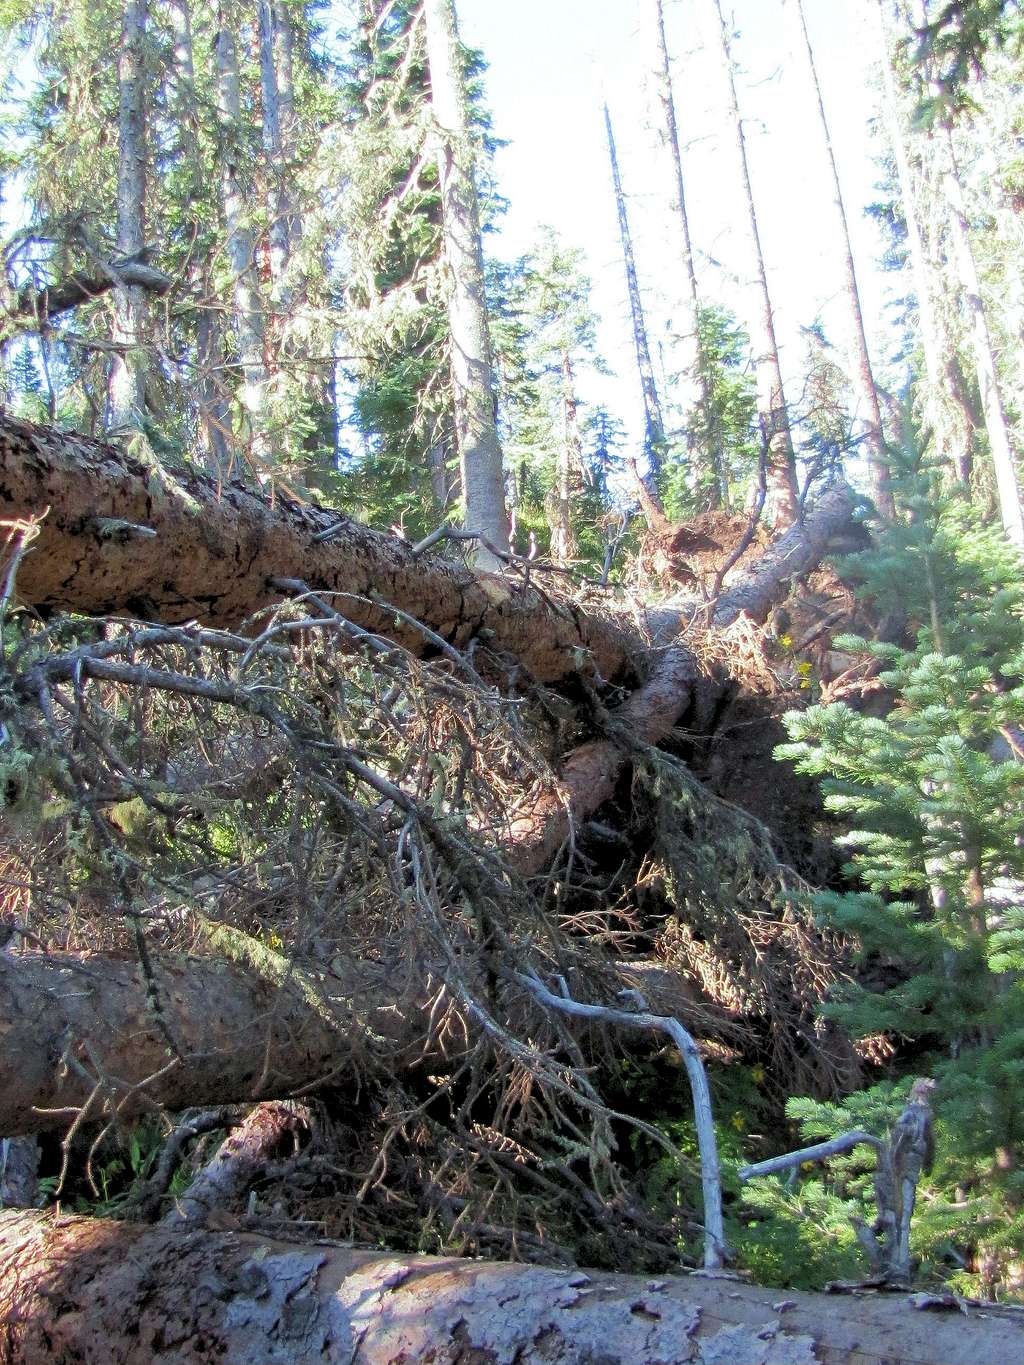 Fallen trees creating obstacles